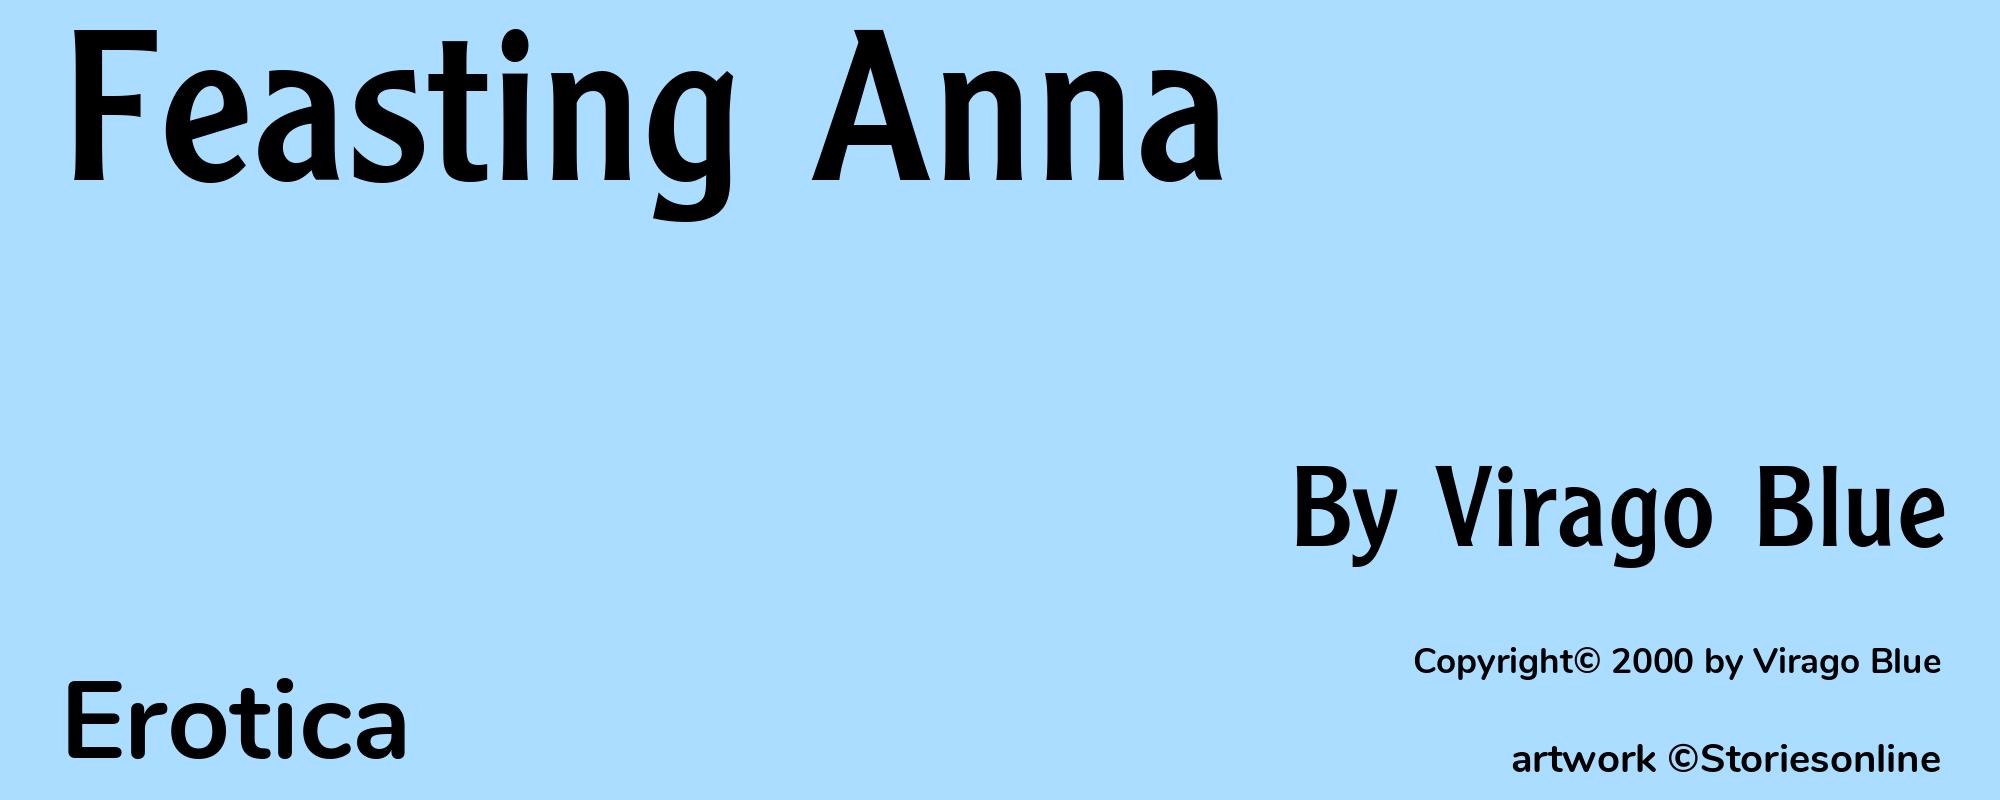 Feasting Anna - Cover